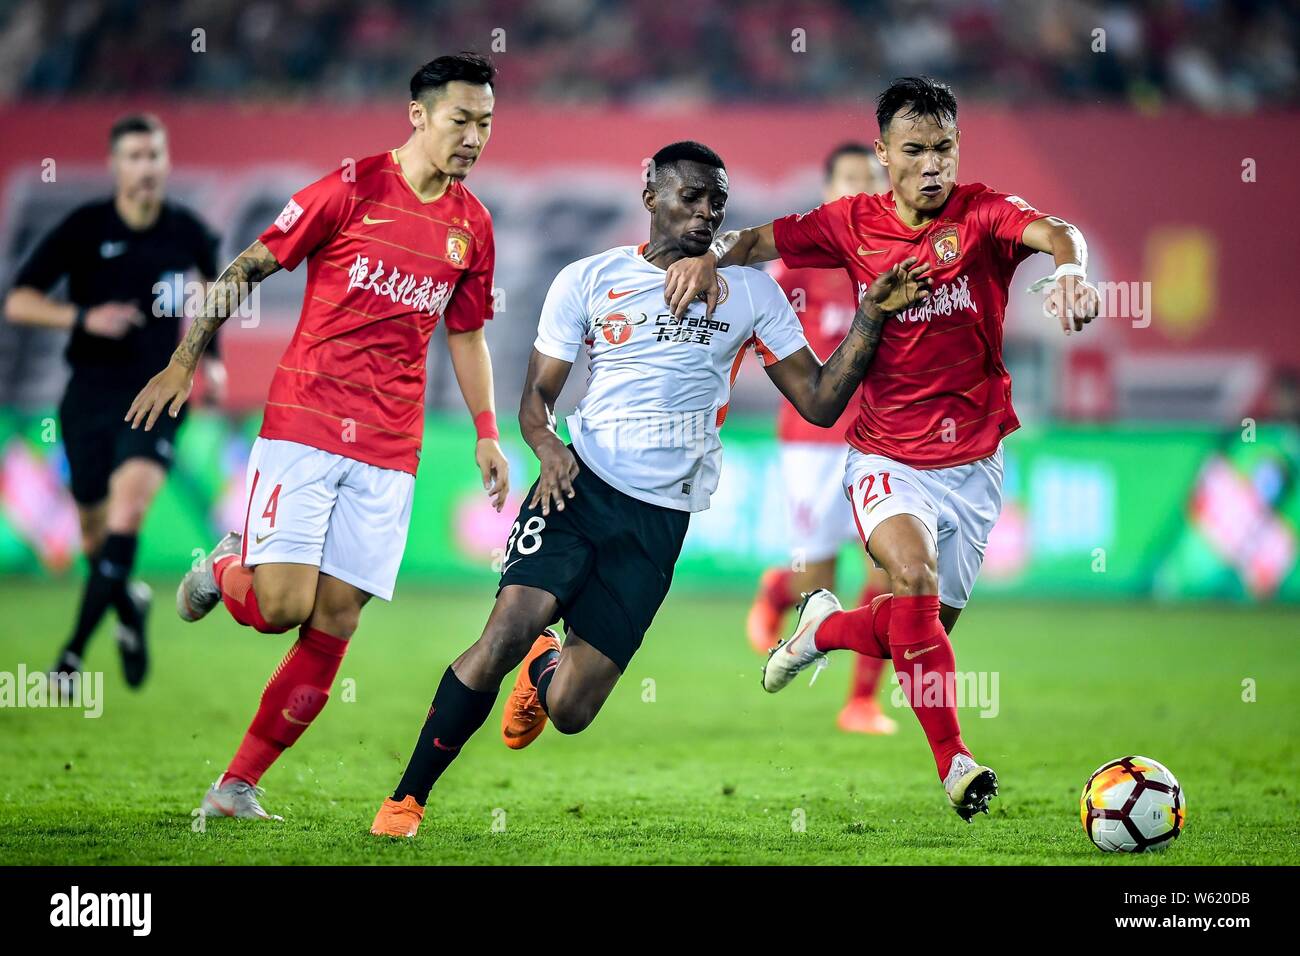 Cameroonian football player Benjamin Moukandjo, center, of Beijing Renhe passes the ball against players of Guangzhou Evergrande Taobao in their 26th Stock Photo